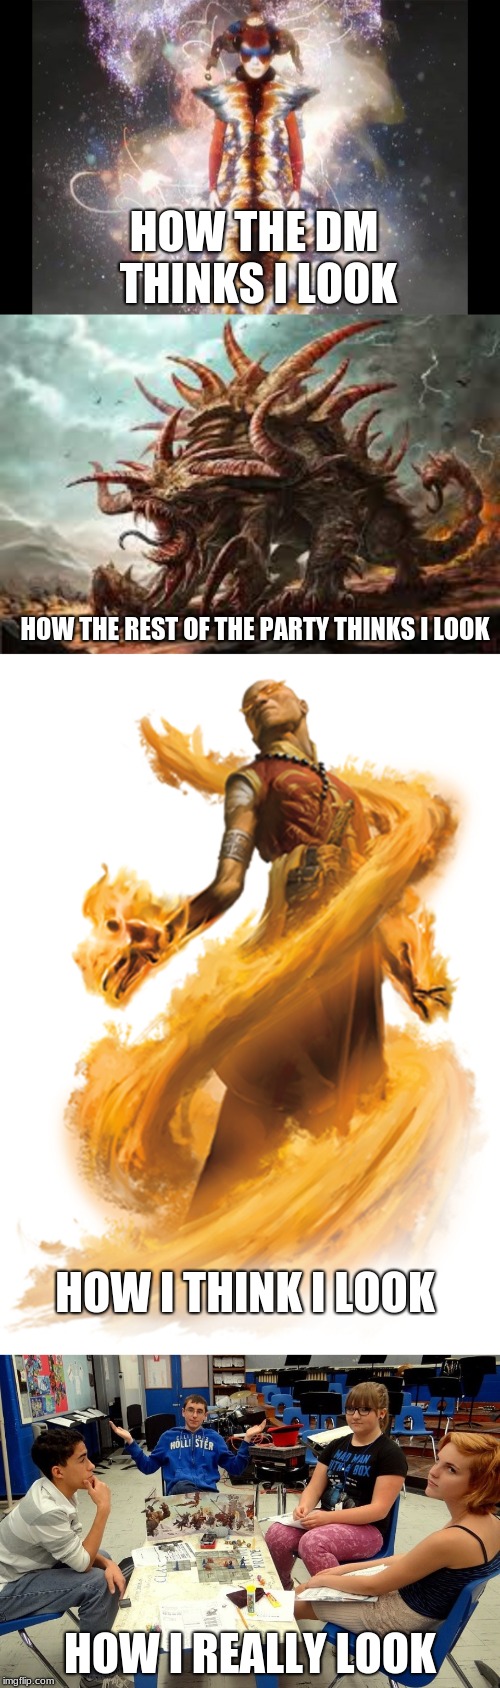 The Person Who Is Two Levels Higher Than The Rest Of The Party | HOW THE DM THINKS I LOOK; HOW THE REST OF THE PARTY THINKS I LOOK; HOW I THINK I LOOK; HOW I REALLY LOOK | image tagged in dnd,dungeons and dragons,how i think i look | made w/ Imgflip meme maker